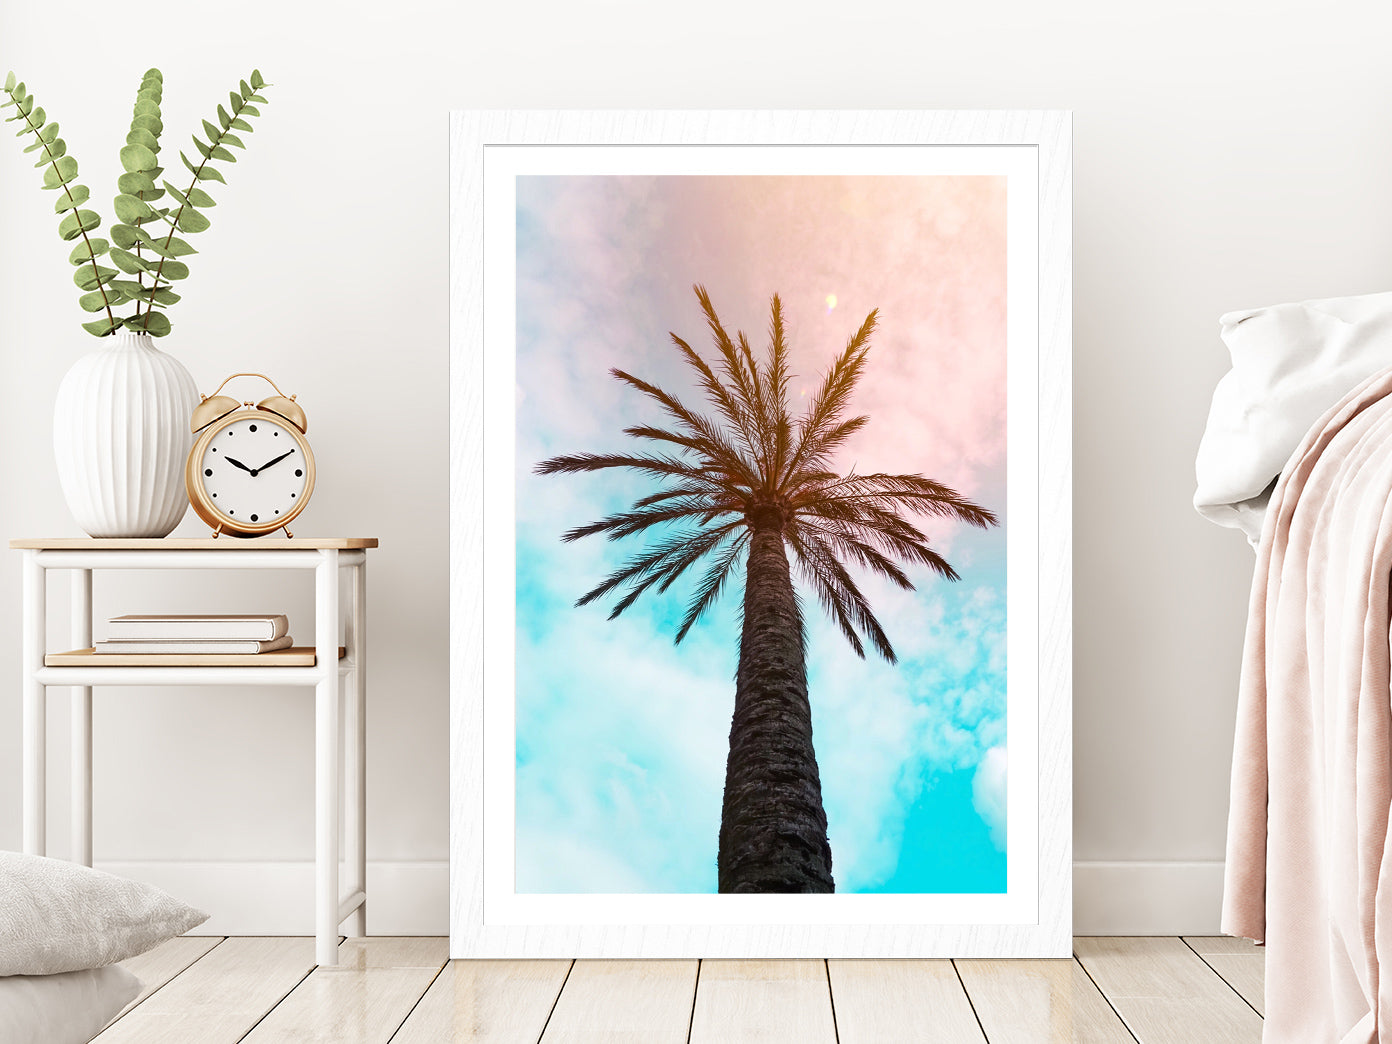 Palm Trees & Blue Pink Sky Scenery Photograph Glass Framed Wall Art, Ready to Hang Quality Print With White Border White